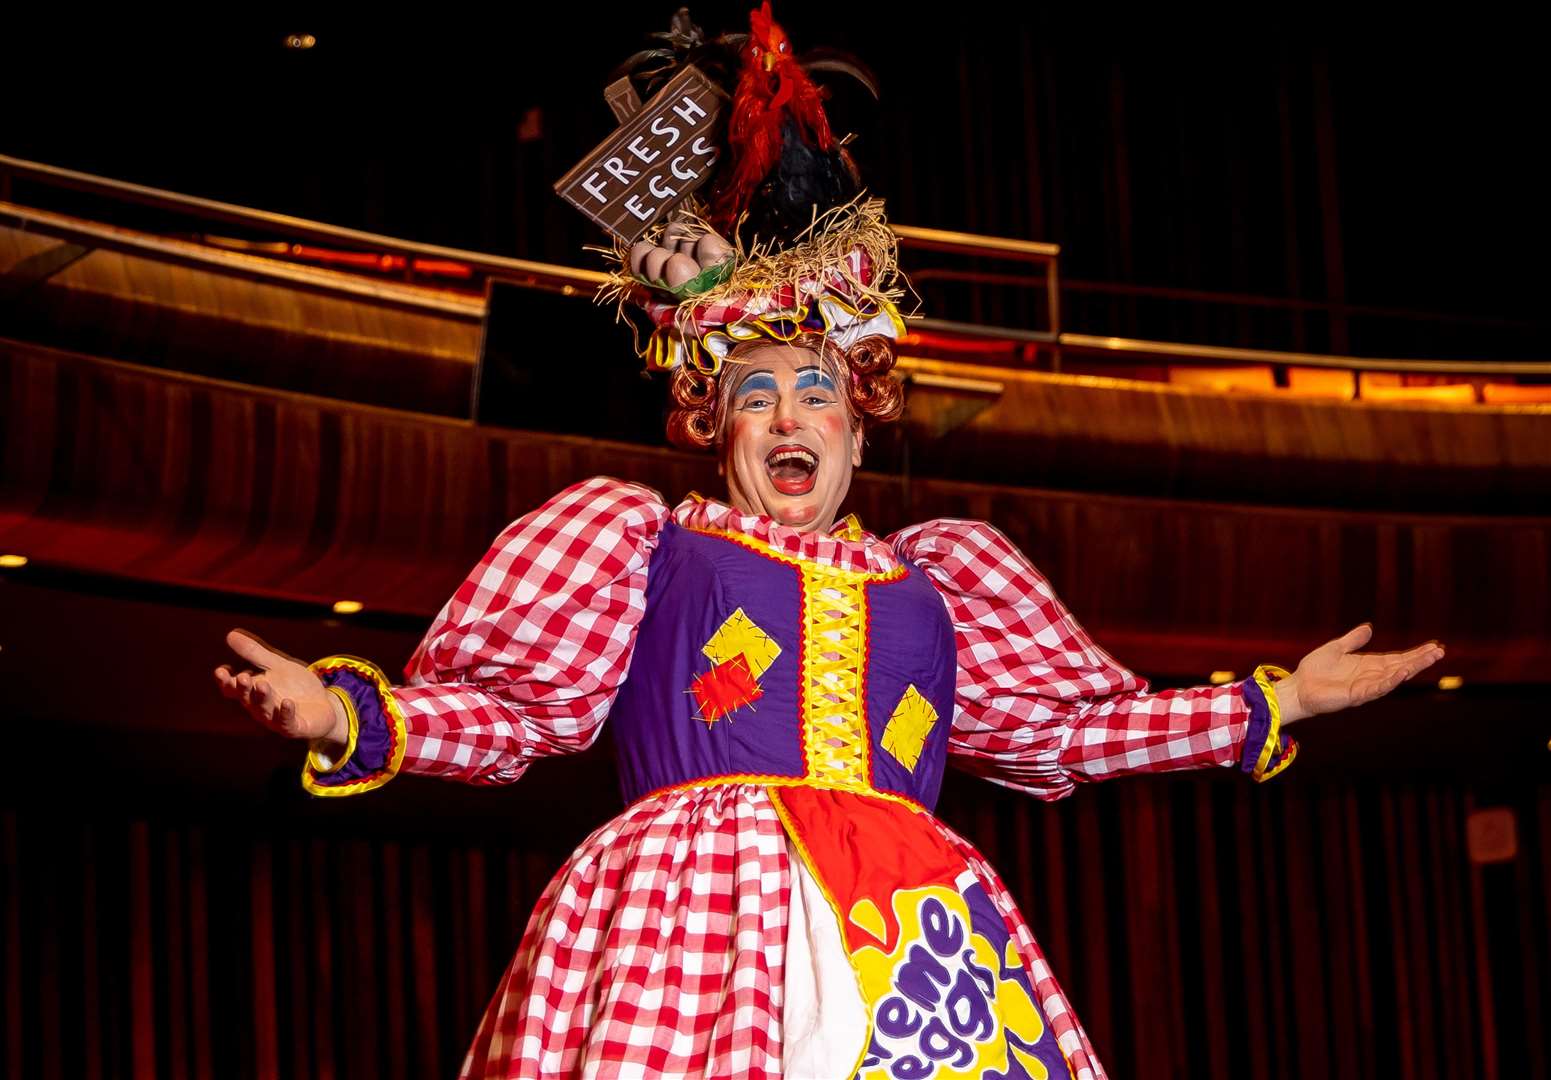 Local favourite Ben Roddy is back again this year Picture: The Marlowe Theatre